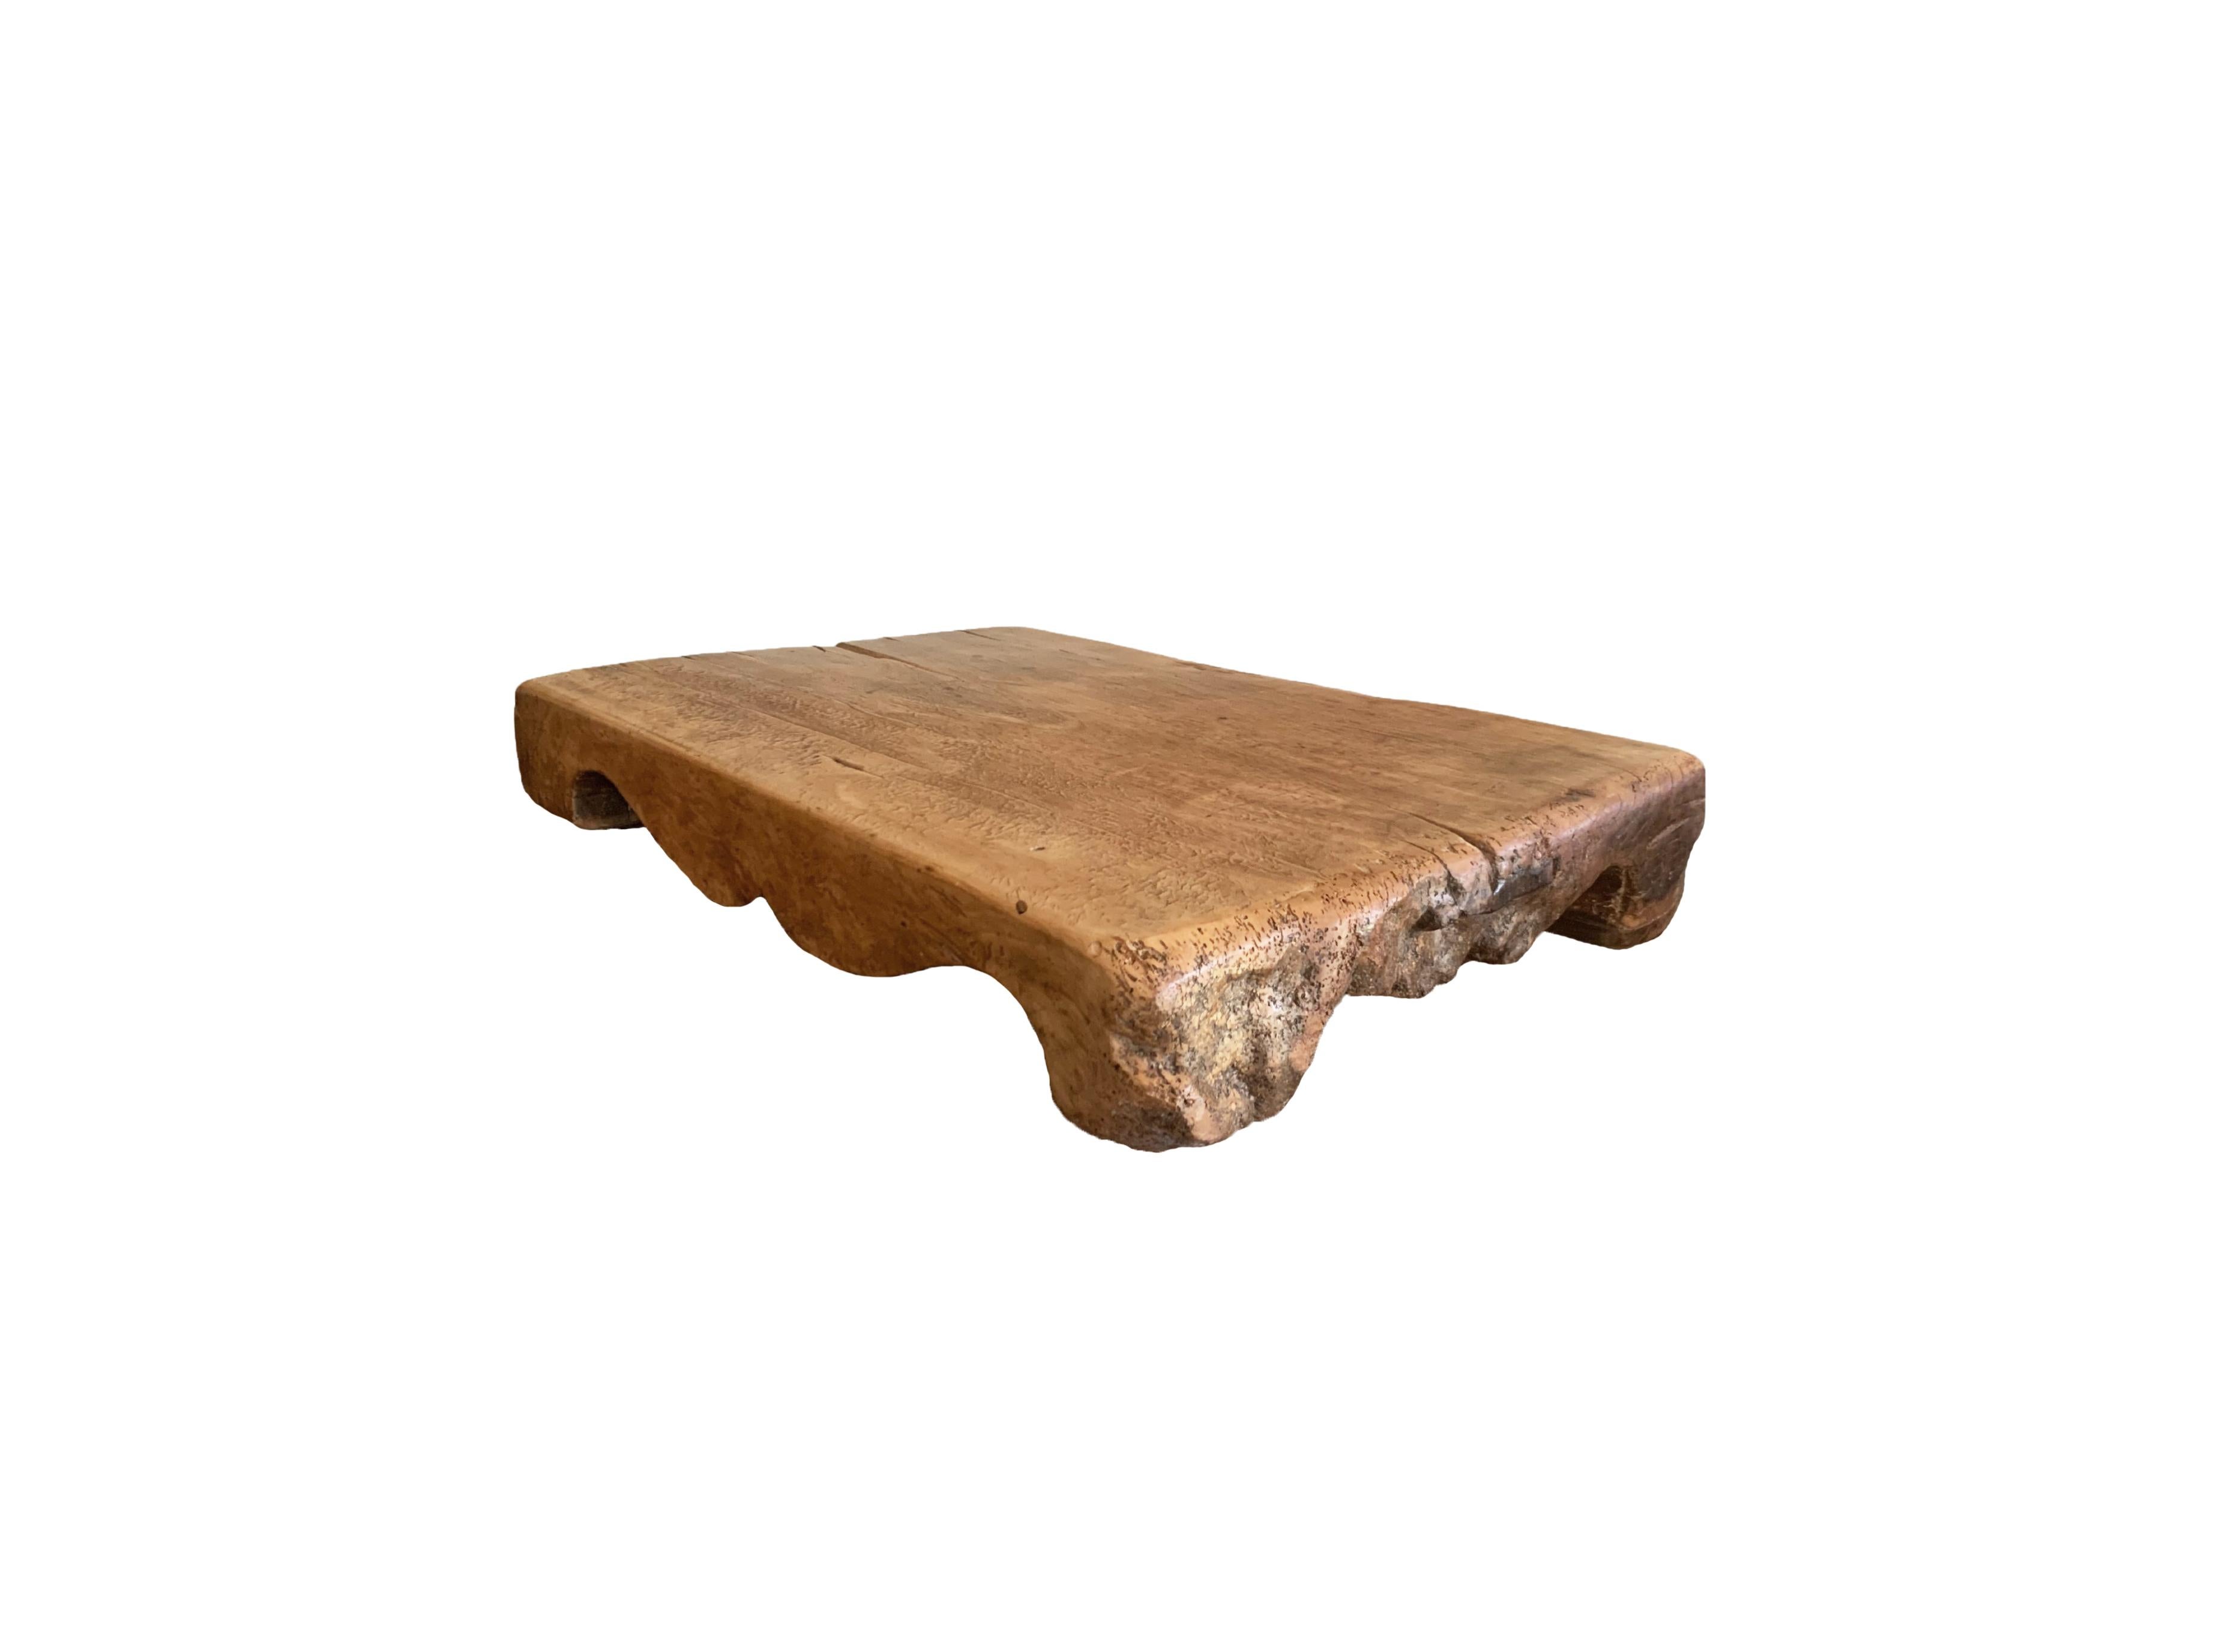 An Antique Chinese chopping block with hand-carved detailing. Two original iron supports are wedged on both sides to support such a large piece of solid wood. Made from a single block of hardwood, the block is very heavy and solid. A wonderful piece